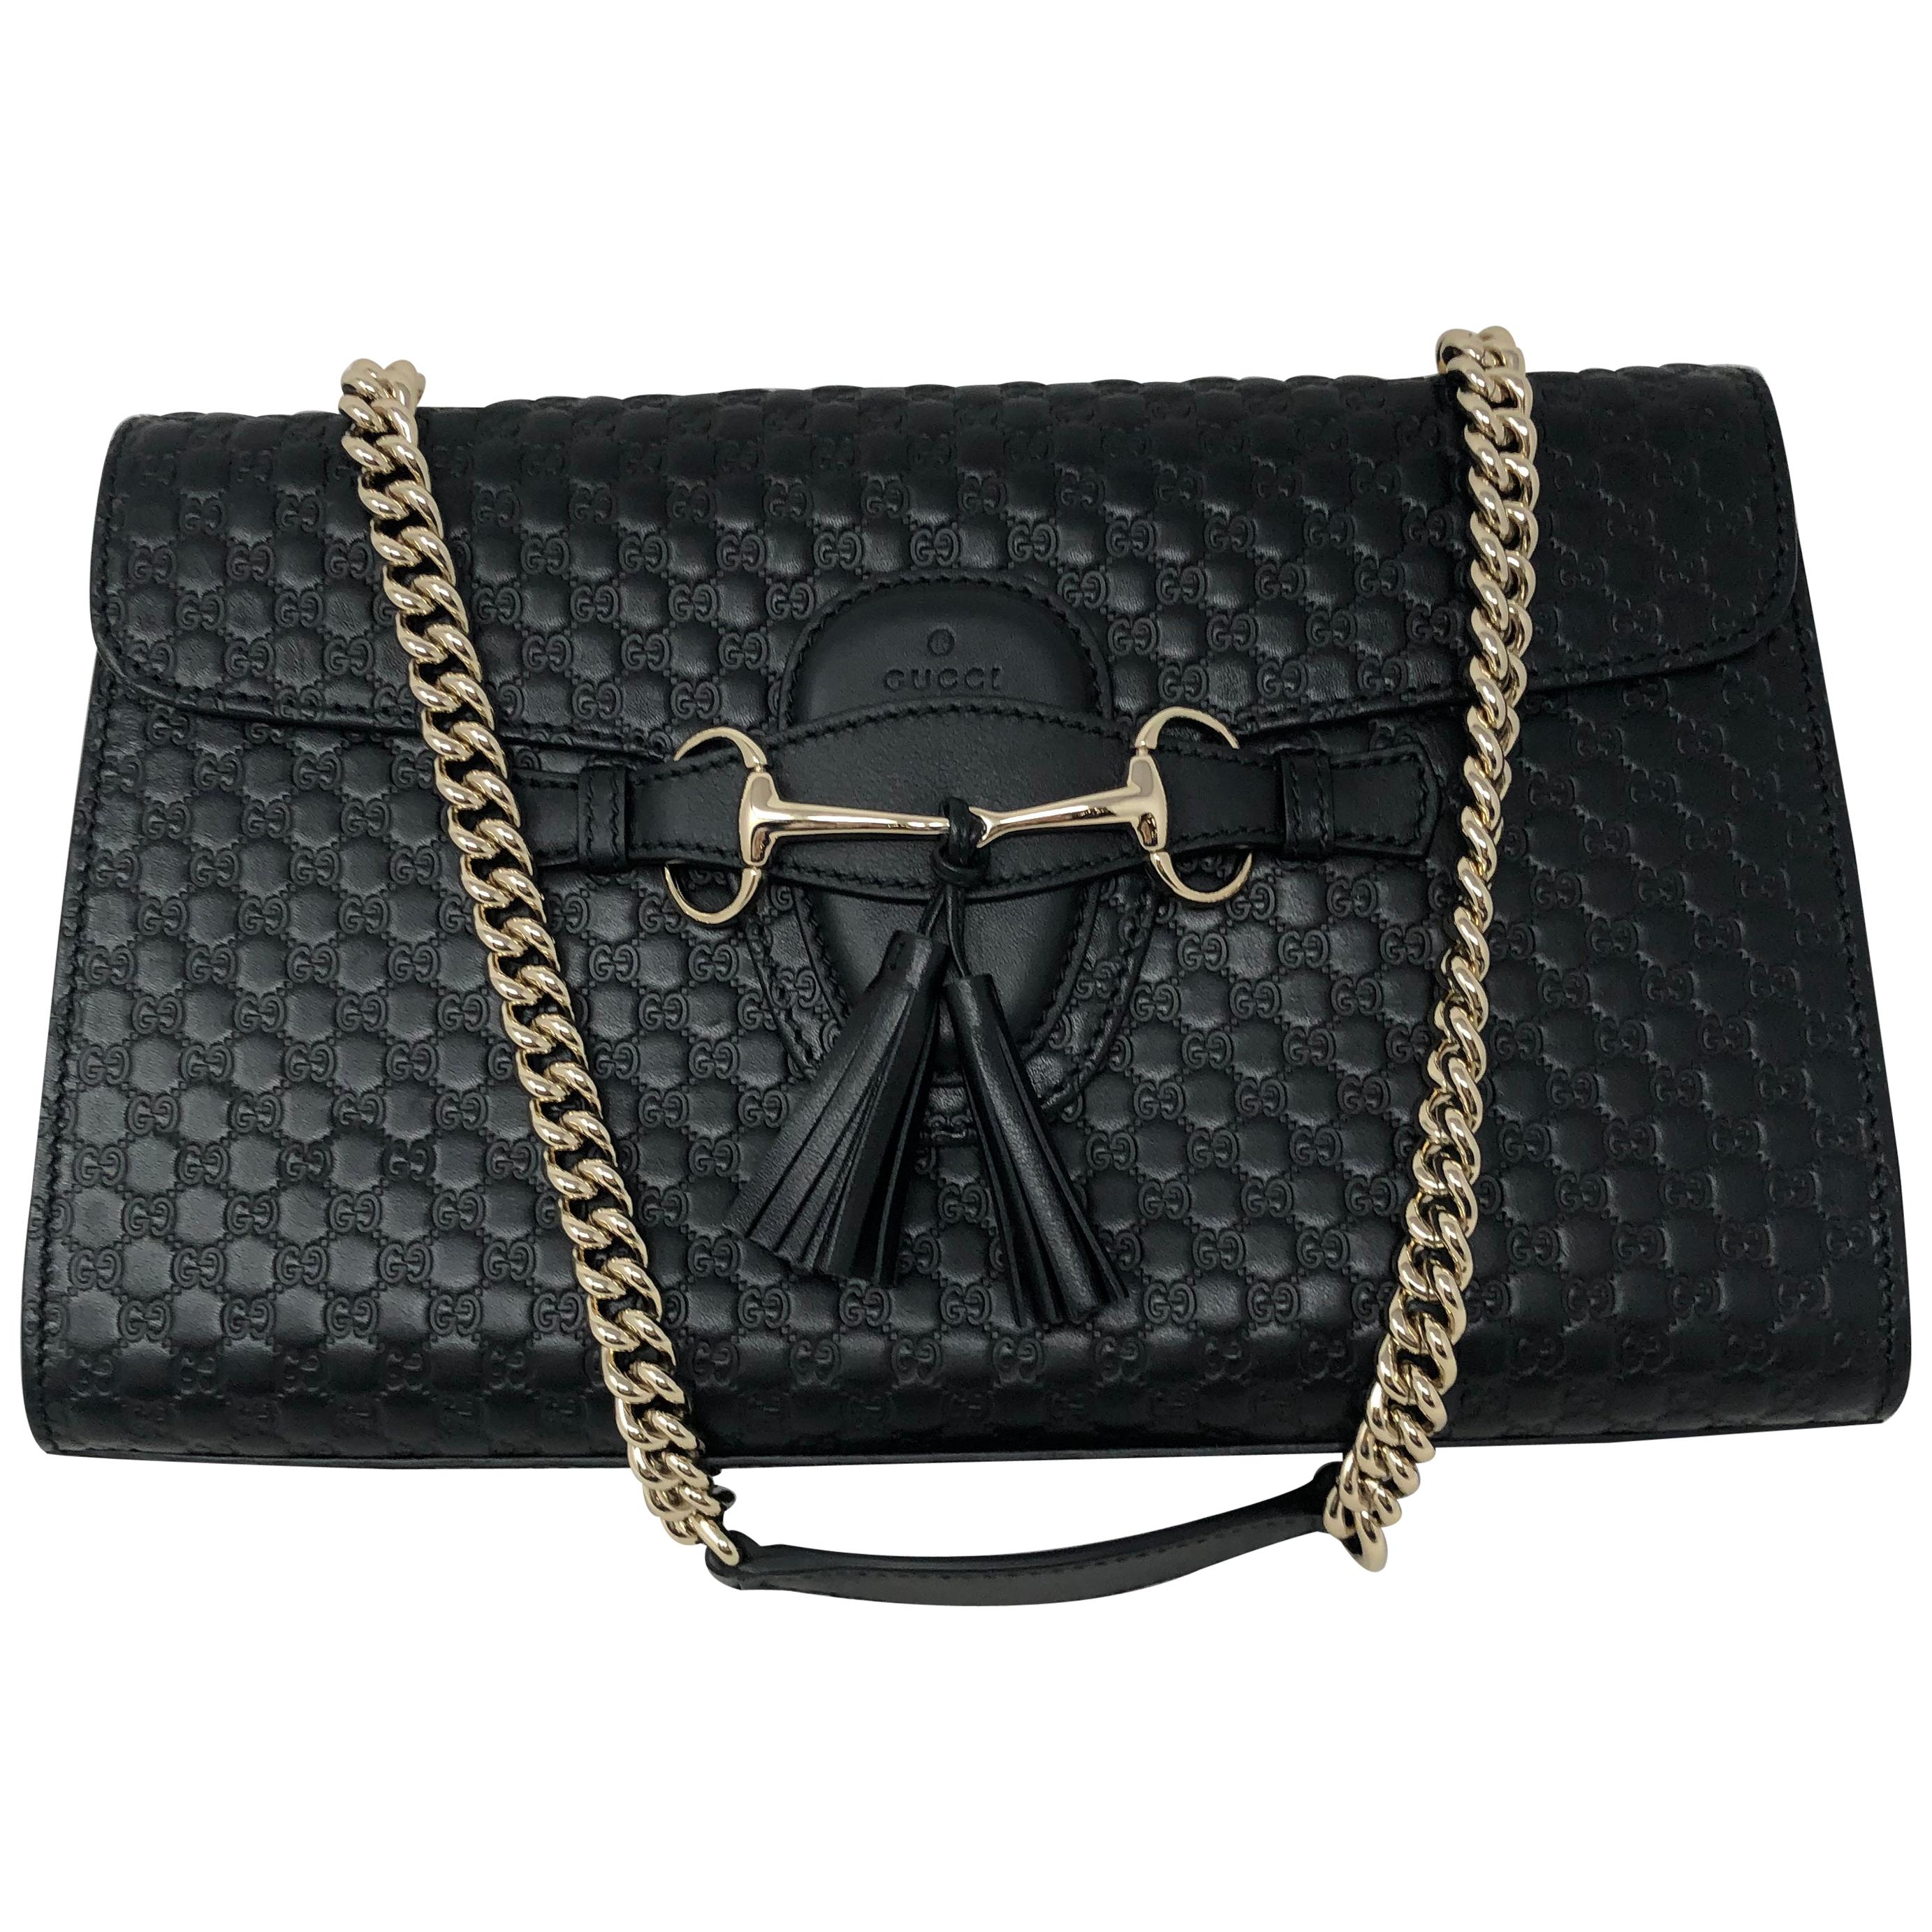 Gucci Embossed Black Leather Bag